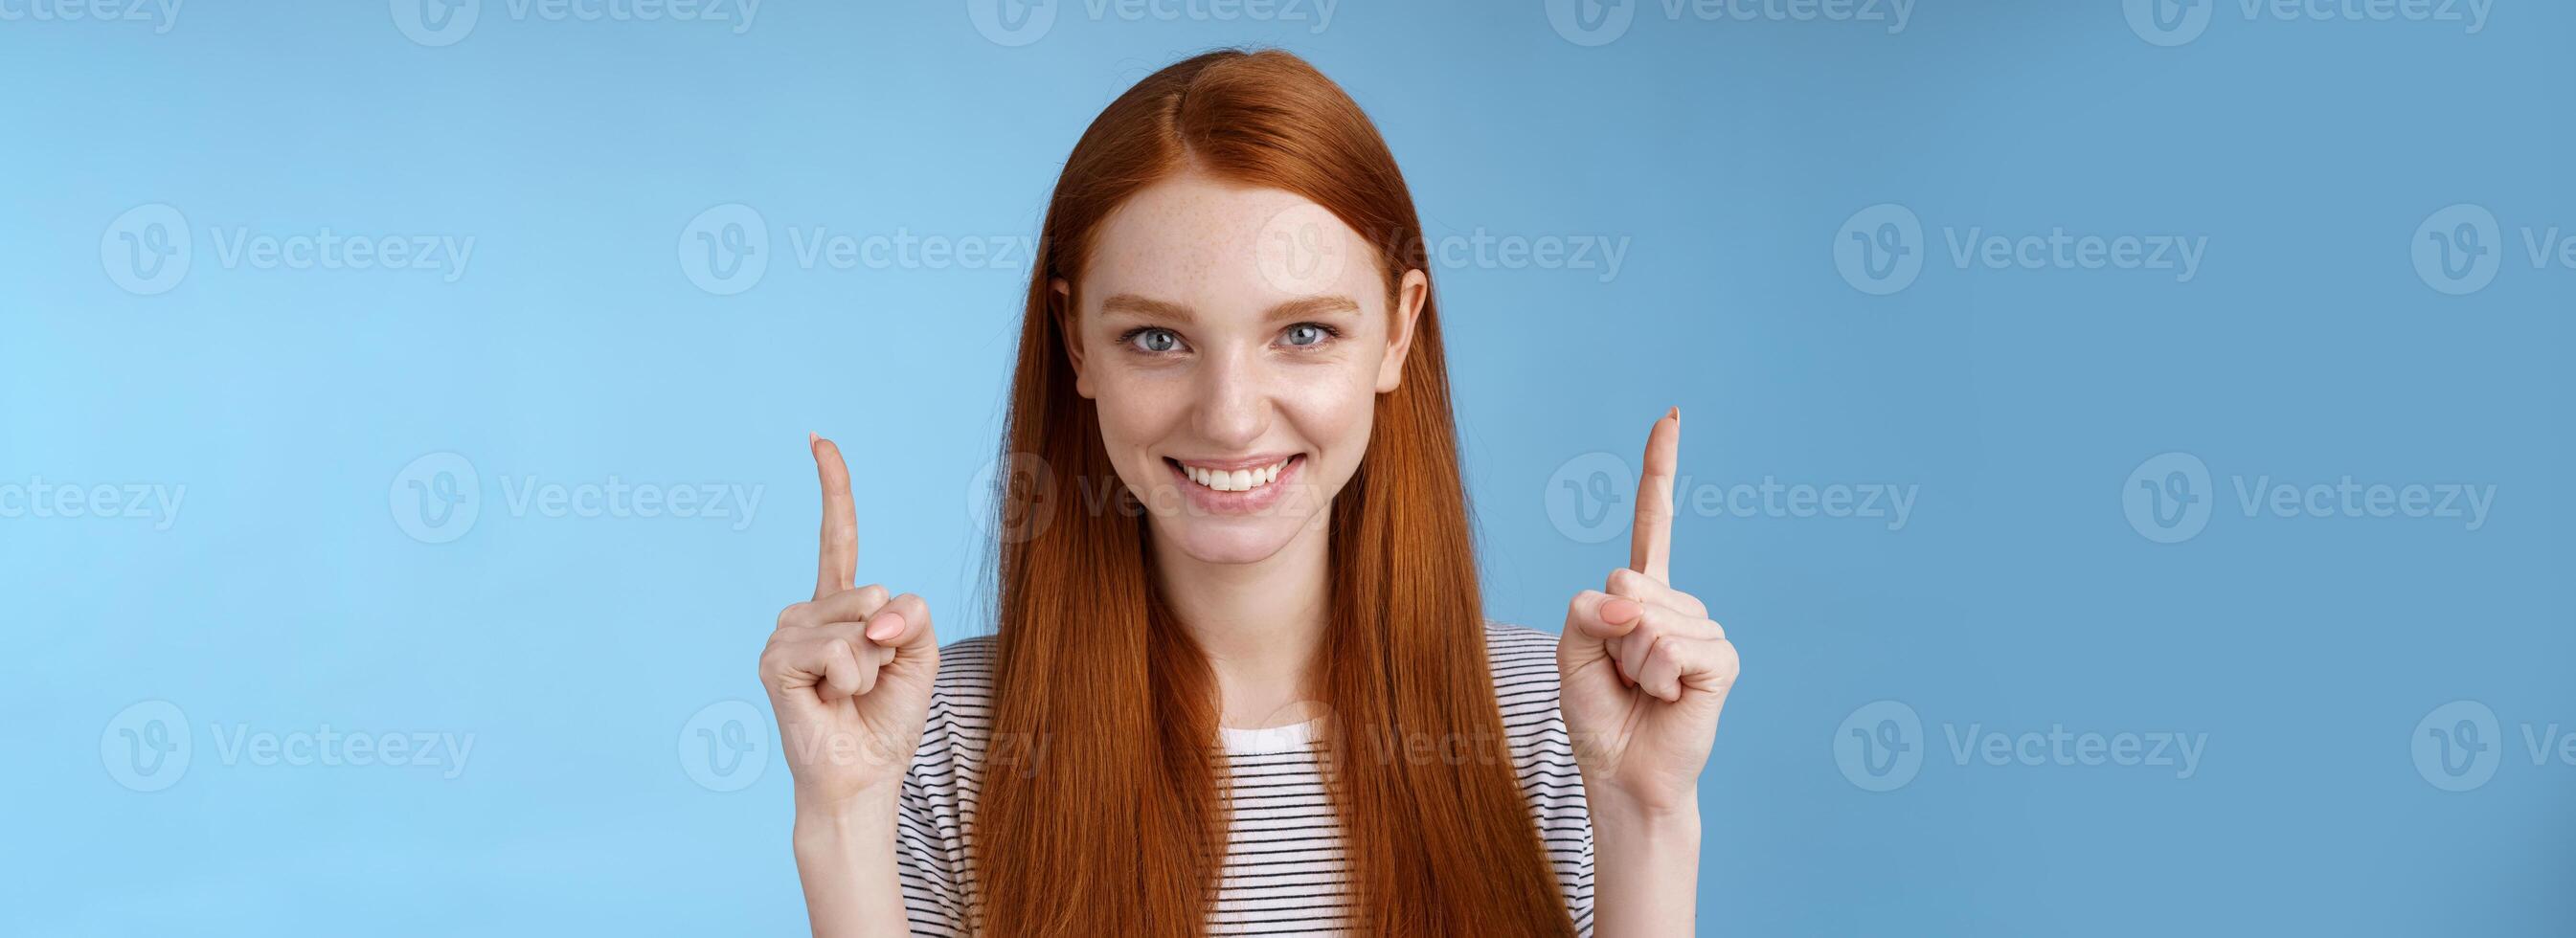 Determined good-looking redhead female student enter college final decision pointing up index fingers raised confidently smiling white teeth look camera assertive giving recommendation what choose photo